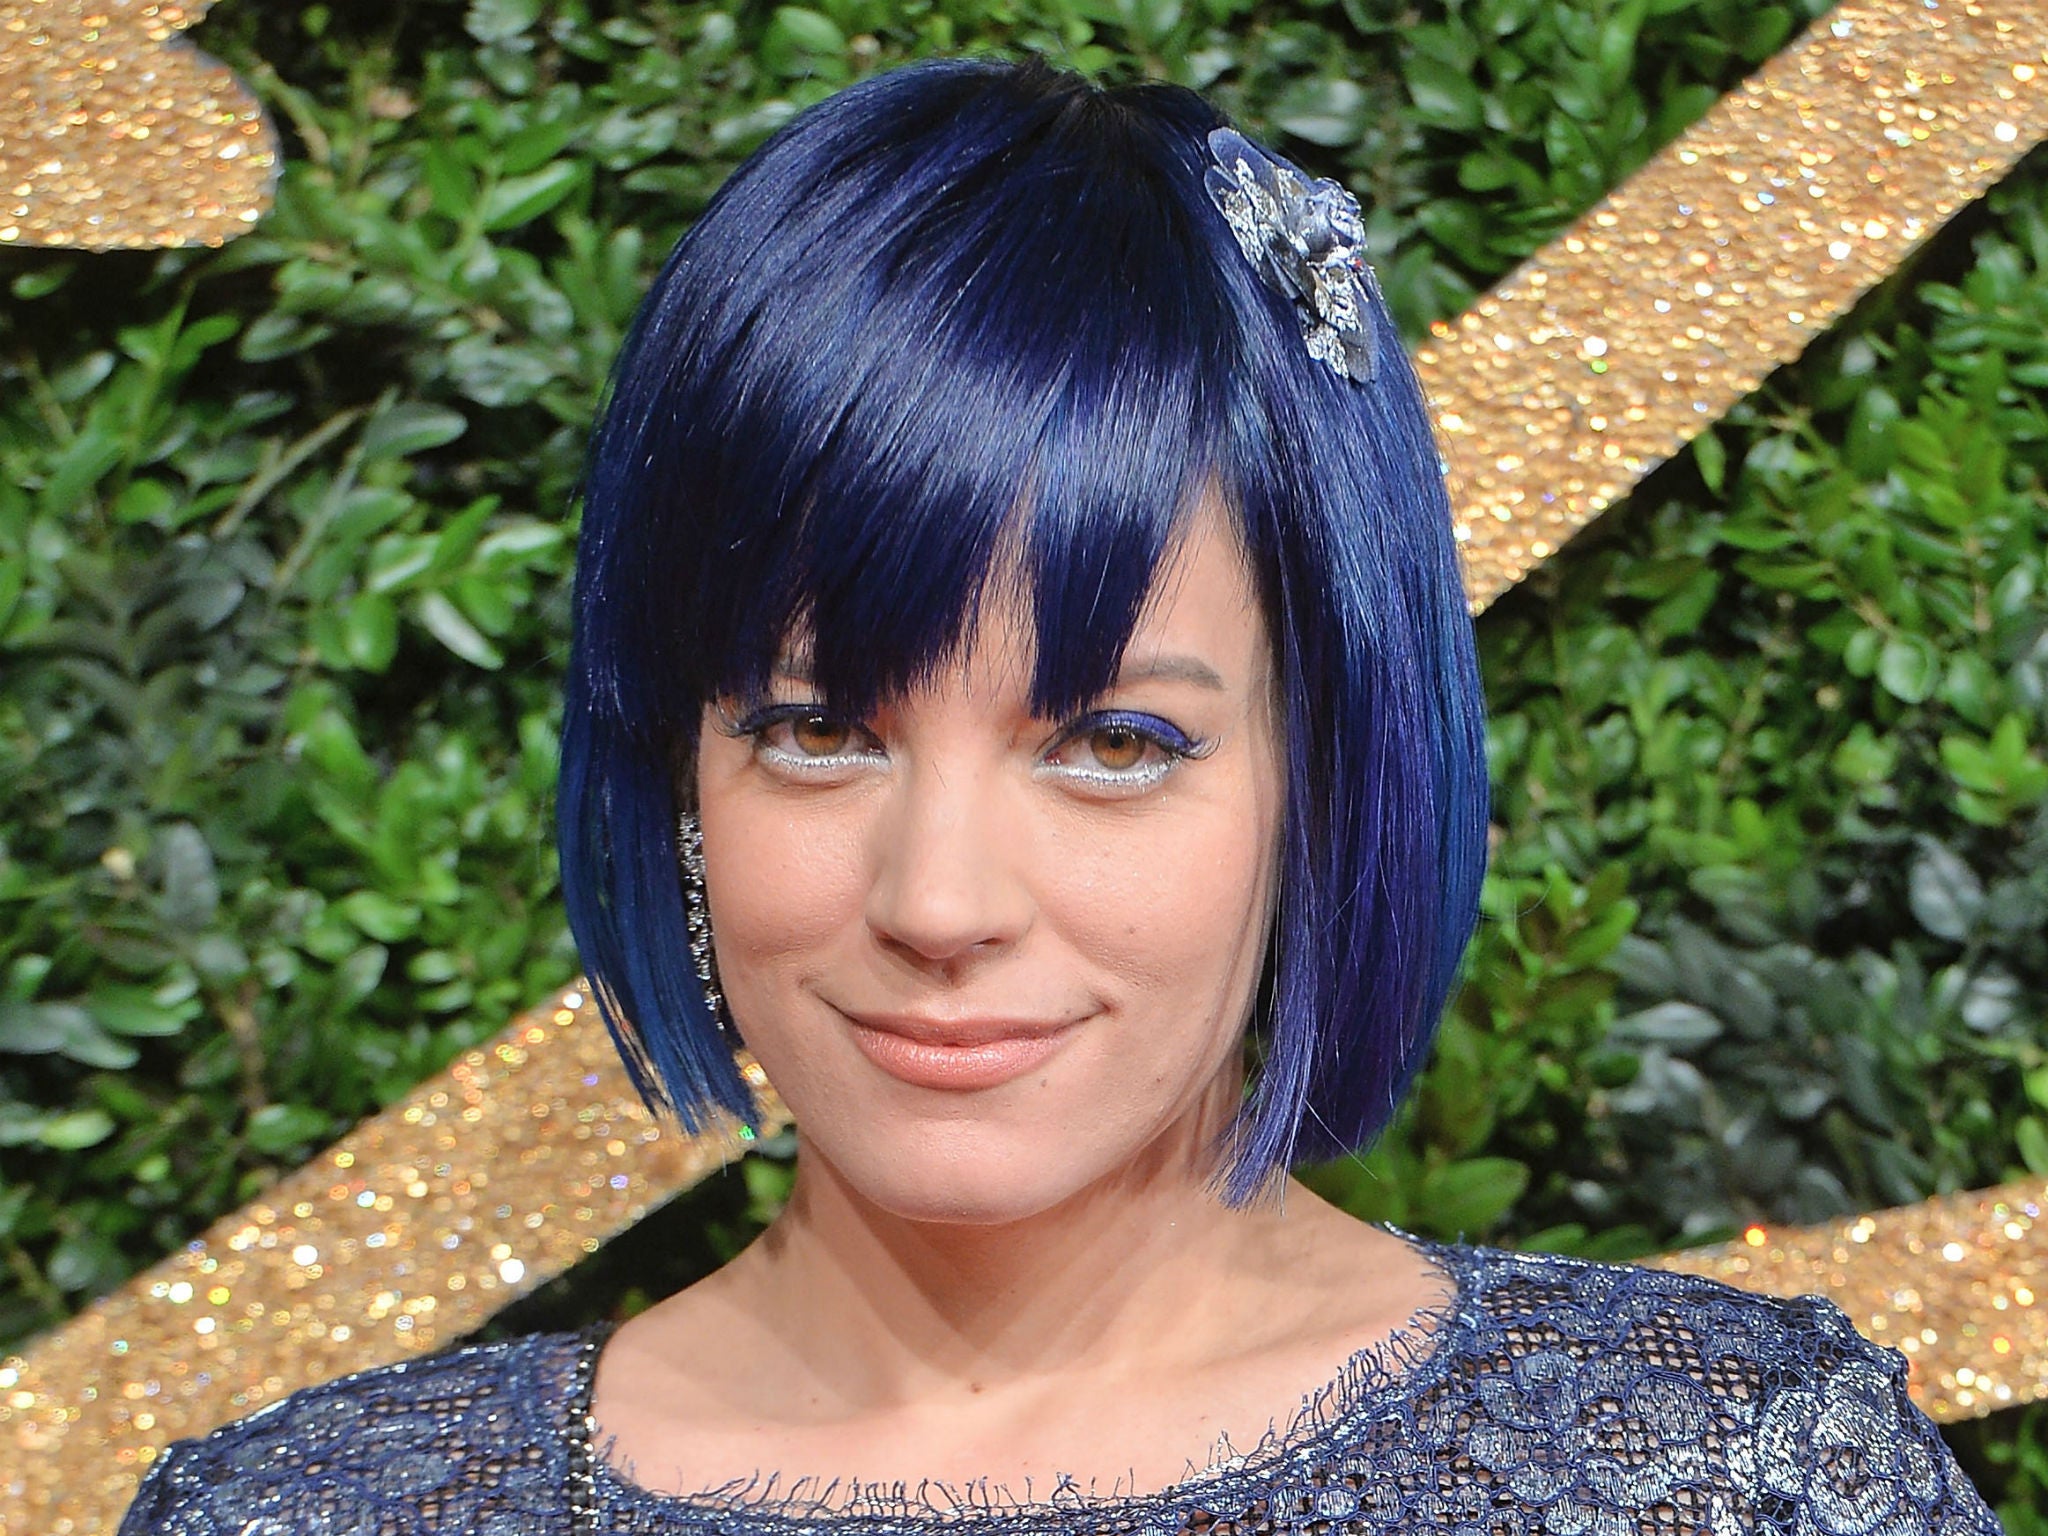 Lily Allen Claims She Was ‘victim Shamed By Metropolitan Police After